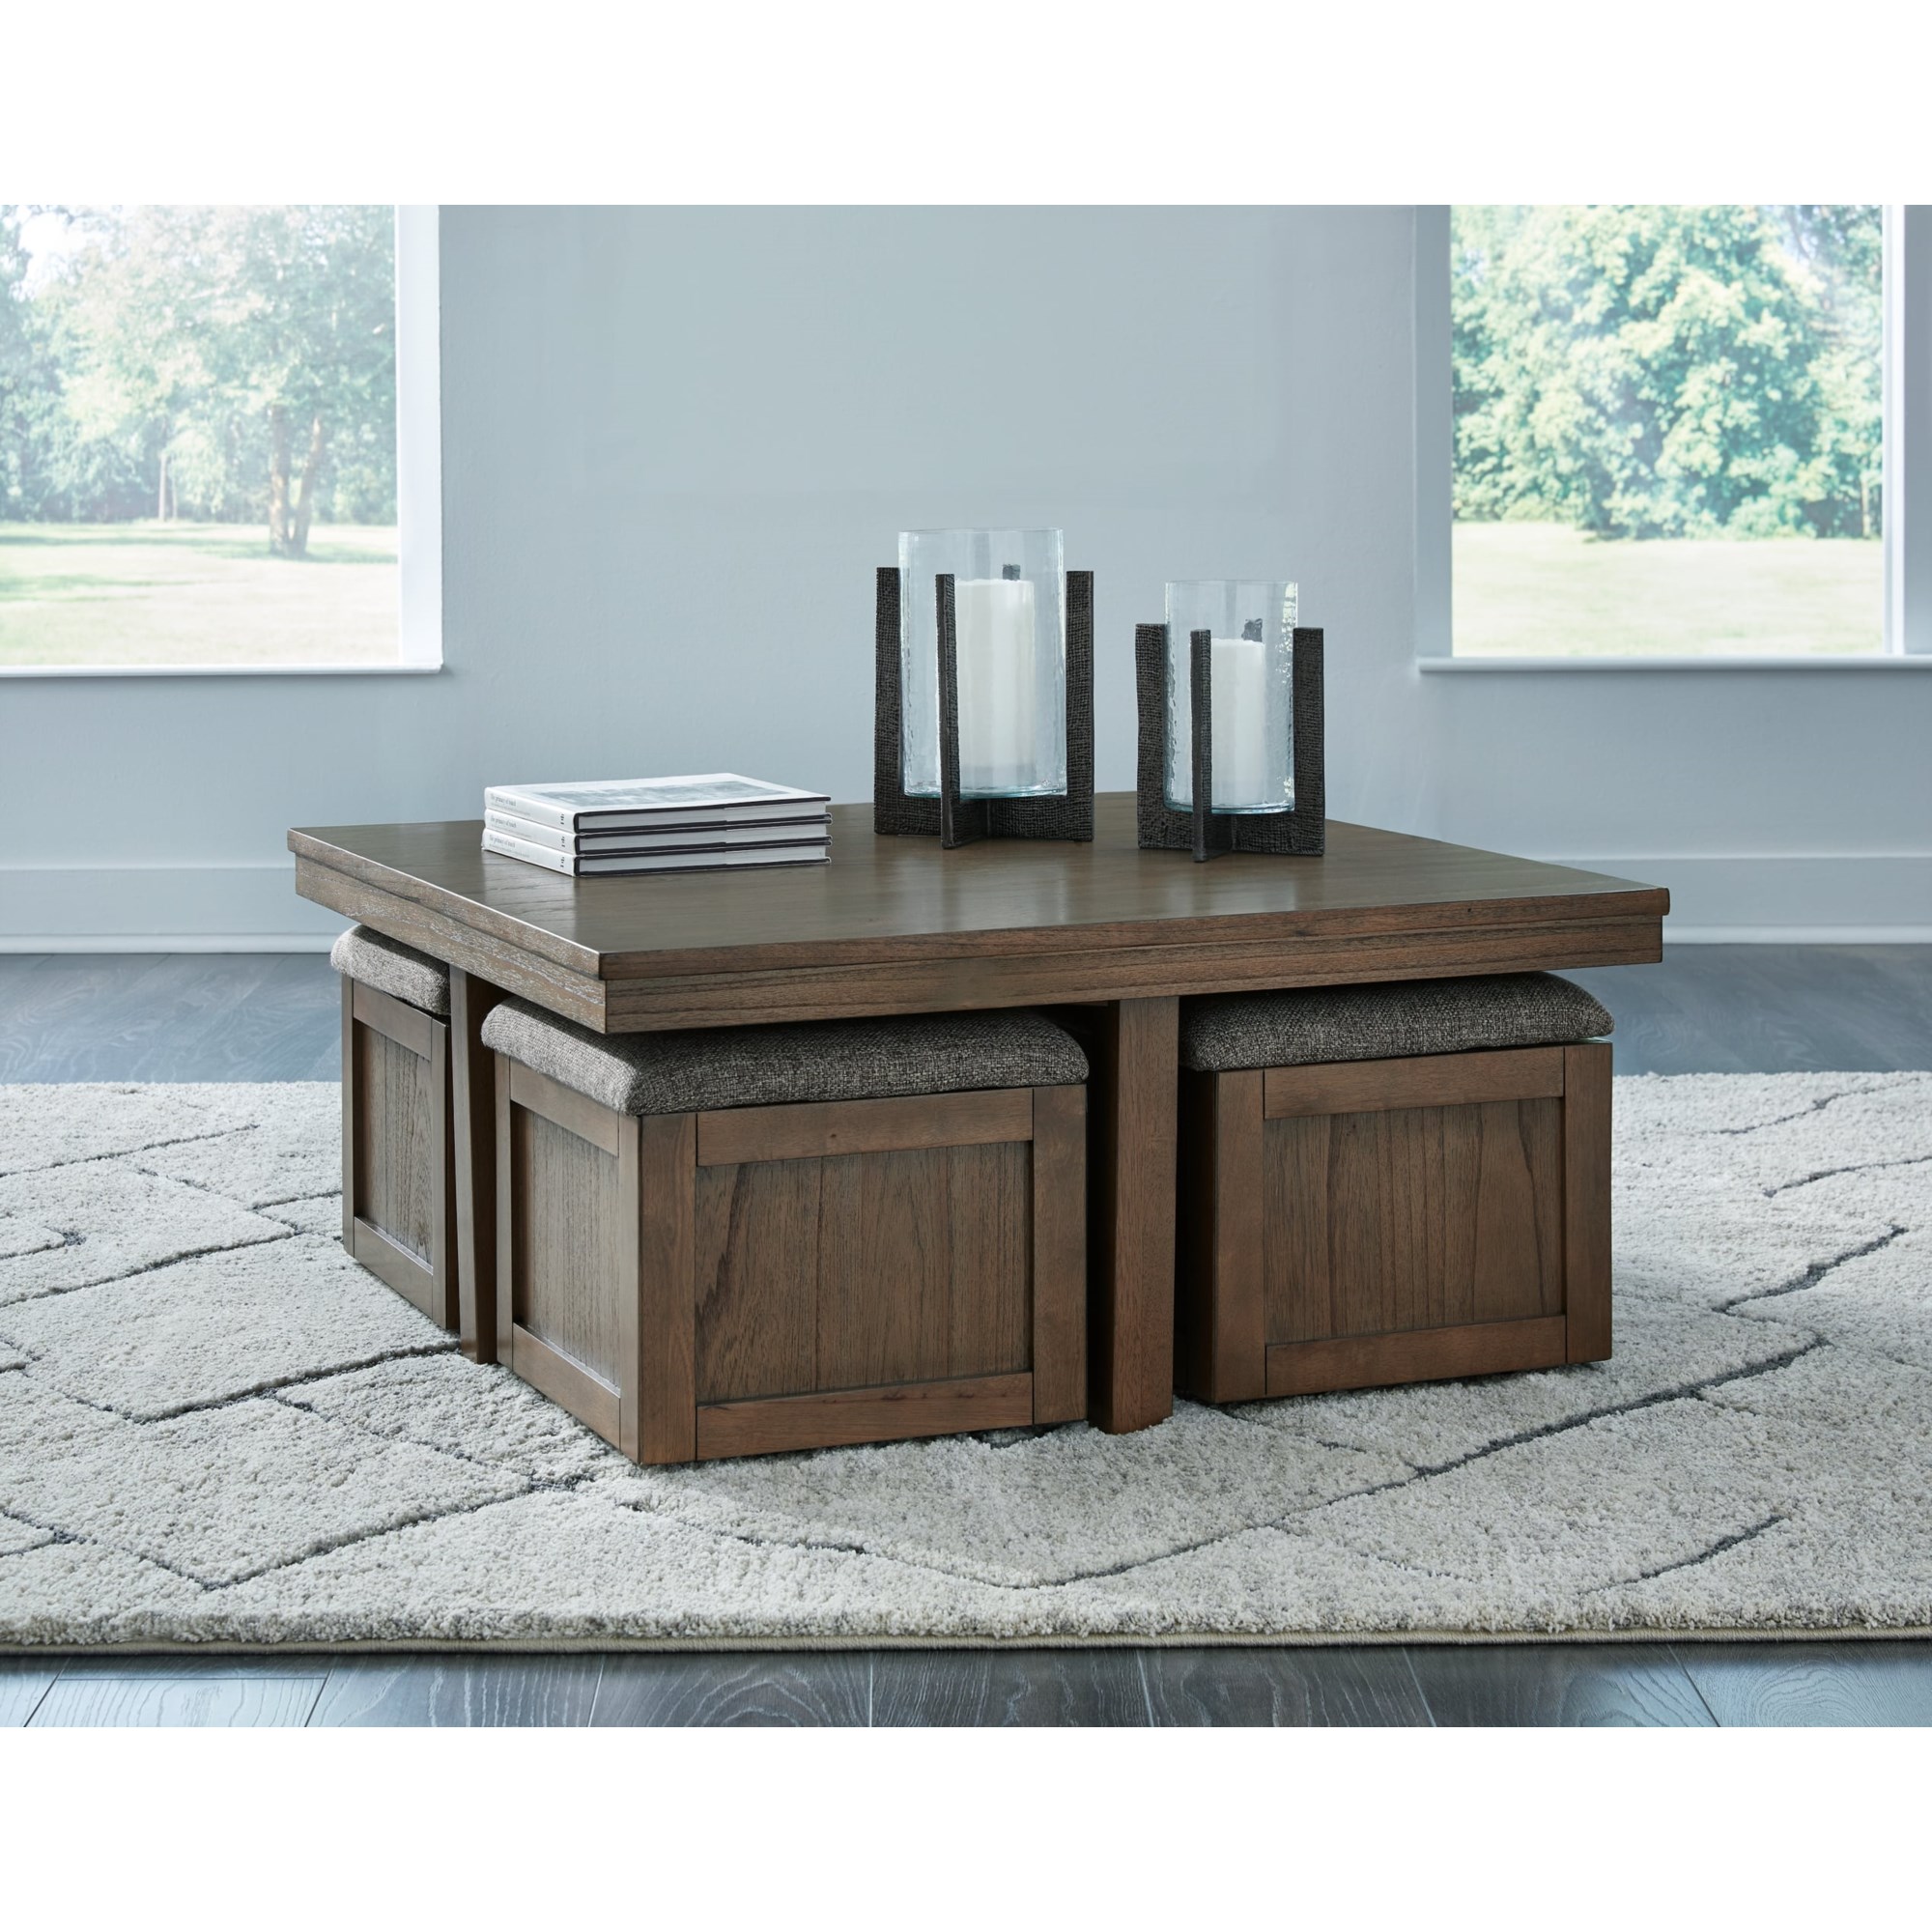 T7701 by Ashley Furniture - Fostead Coffee Table